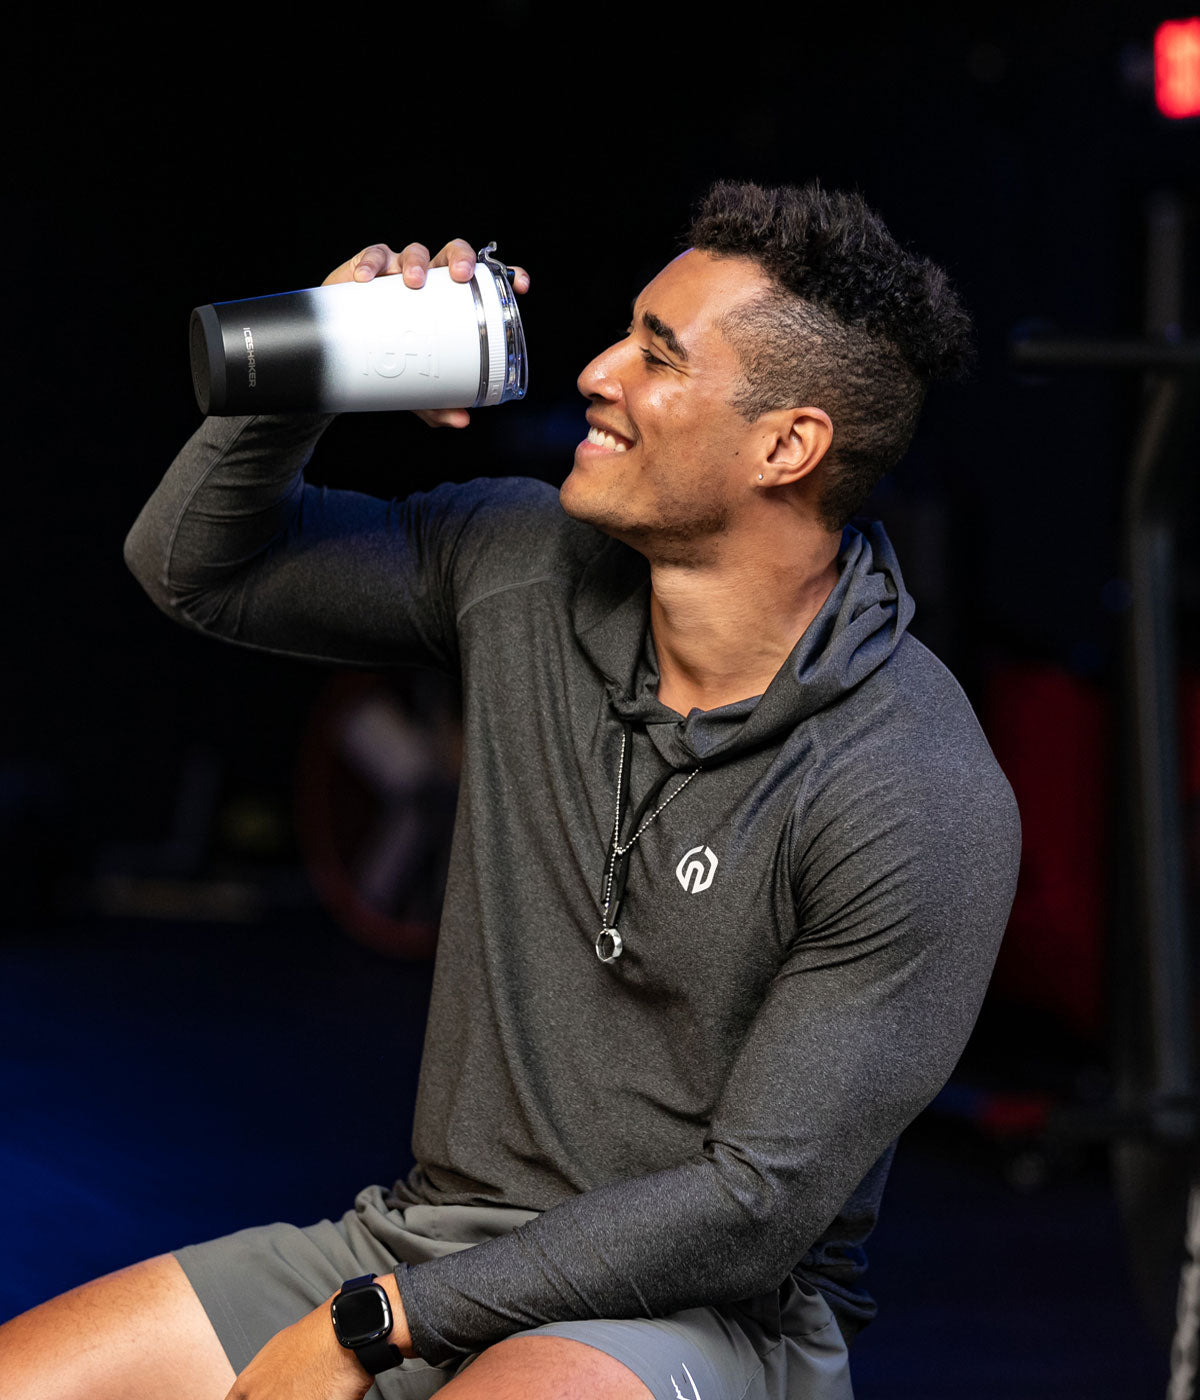 This image shows a young, athletic man taking a drink from a White Black Ombre-colored 26oz Flex Bottle.